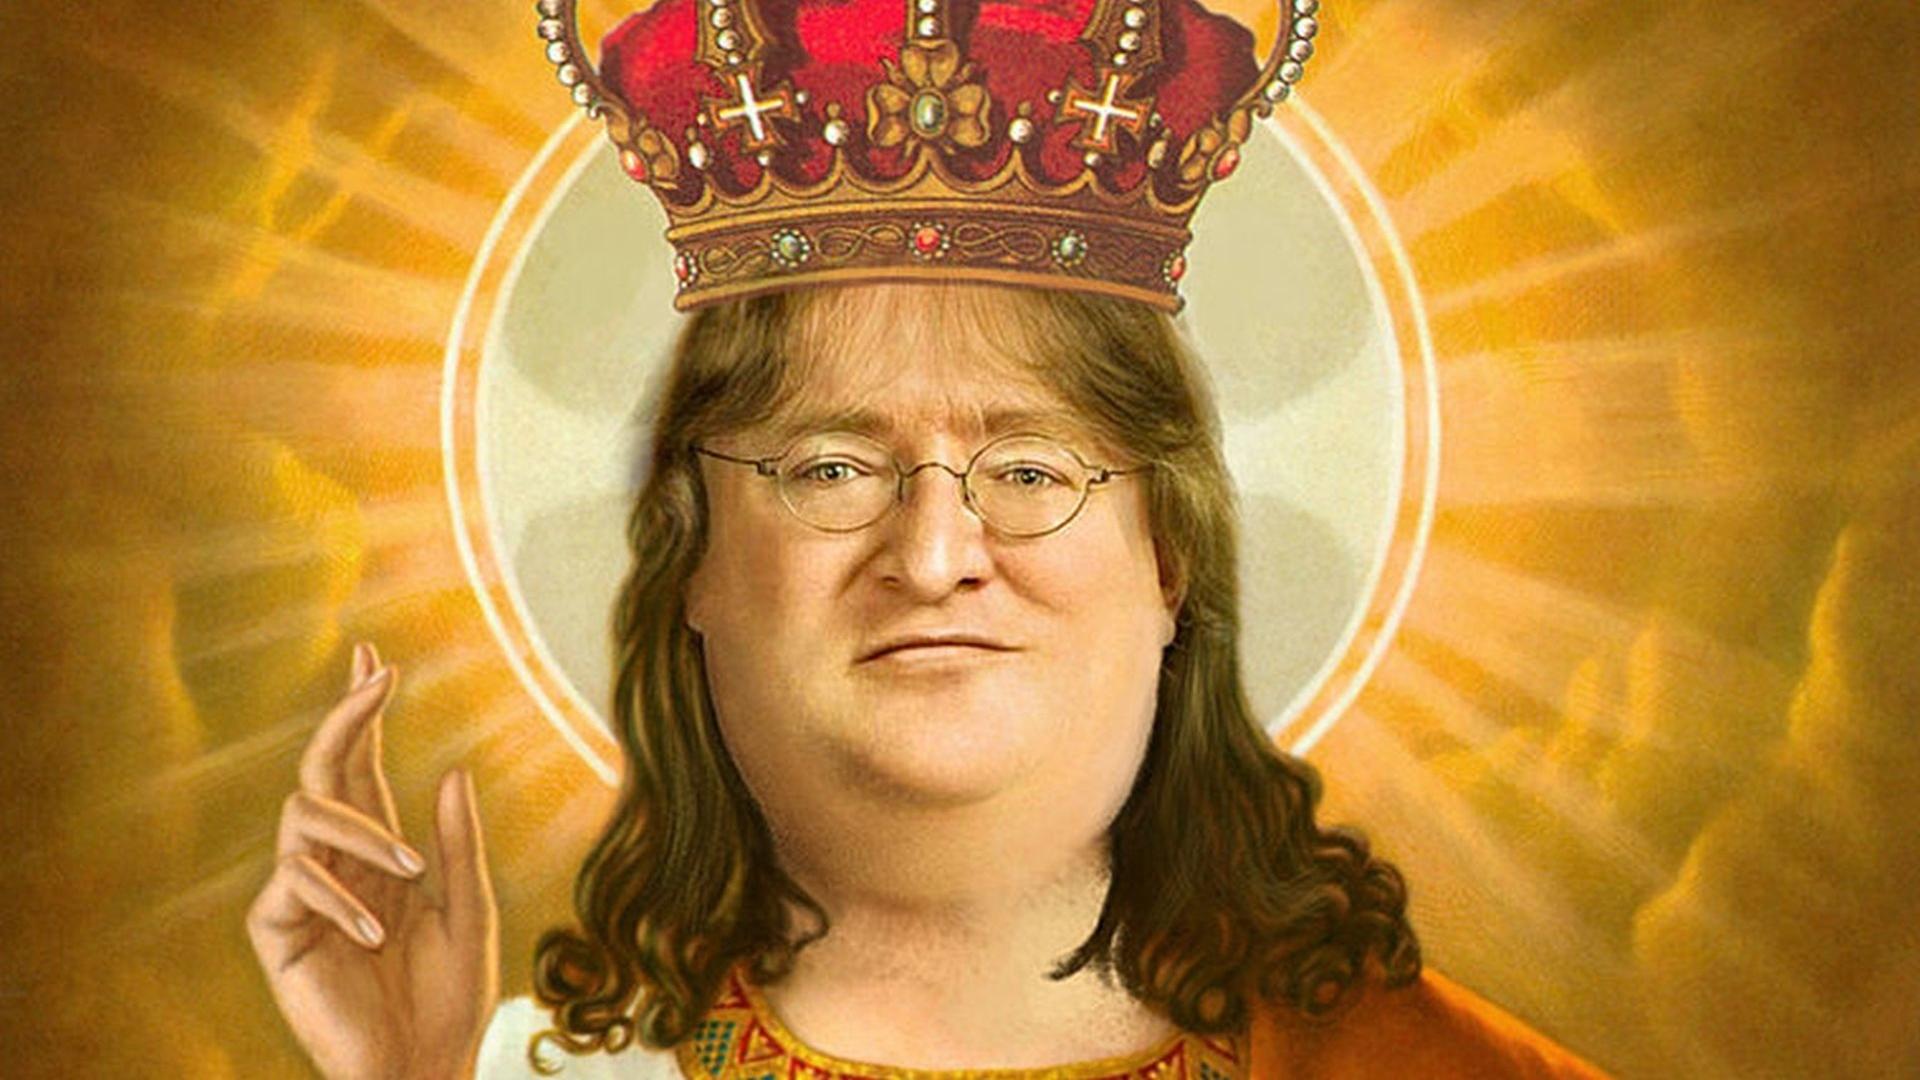 The Valve Office Has A Floor To Ceiling Picture Of The Lord Gaben